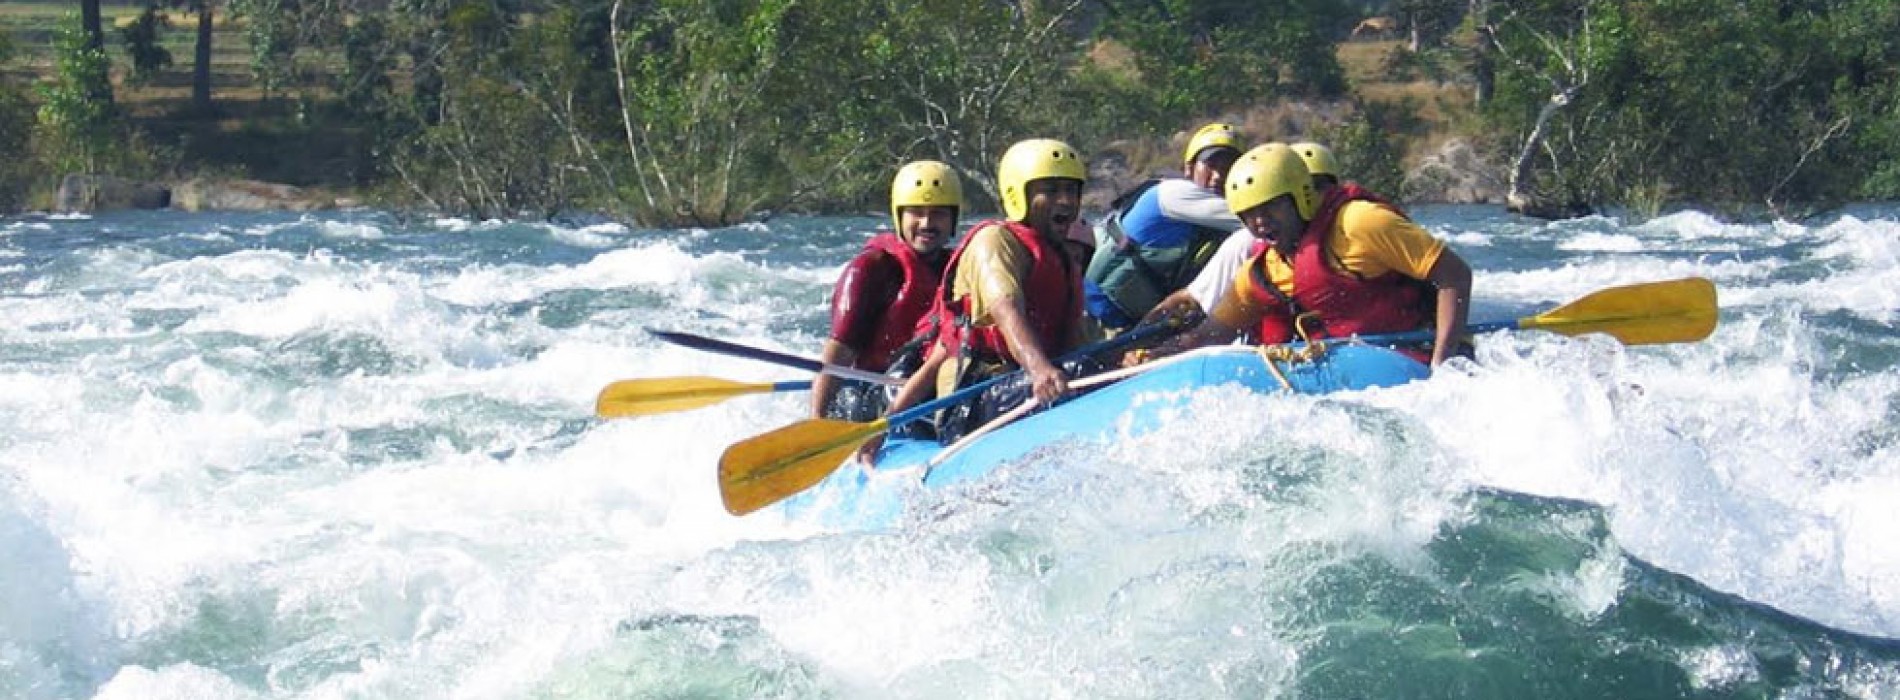 White Water Rafting commences in Goa!